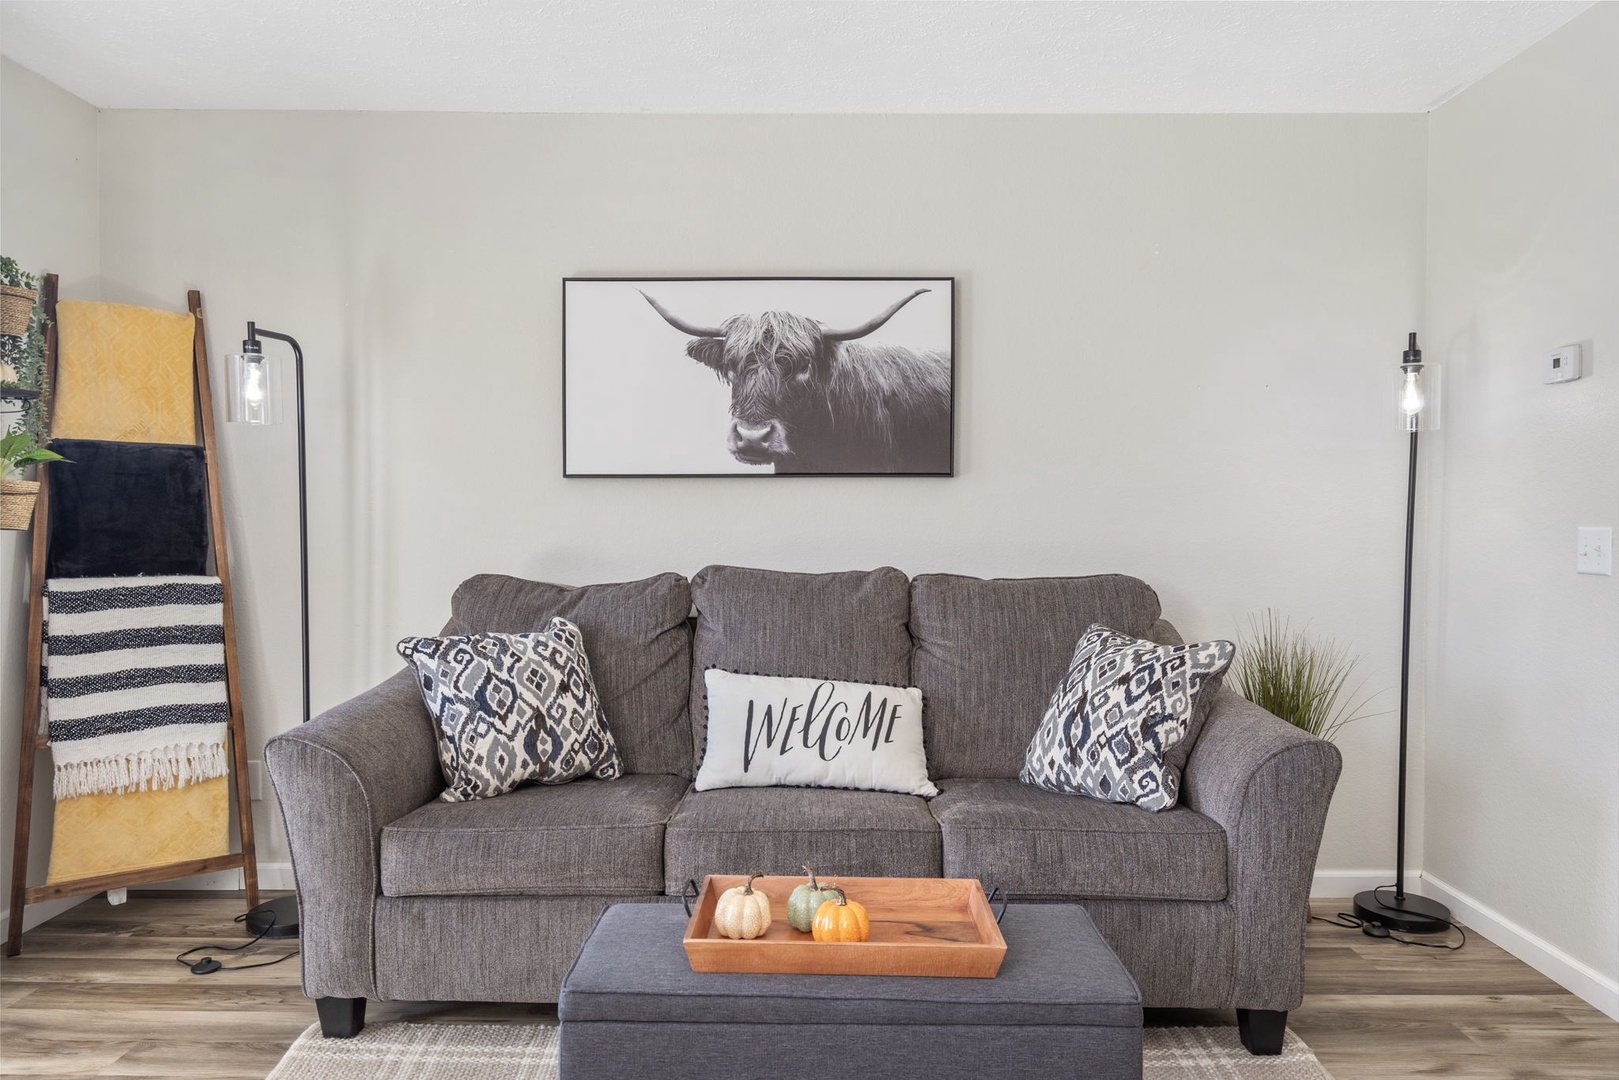 Comfortable seating in the living room for you and your guests